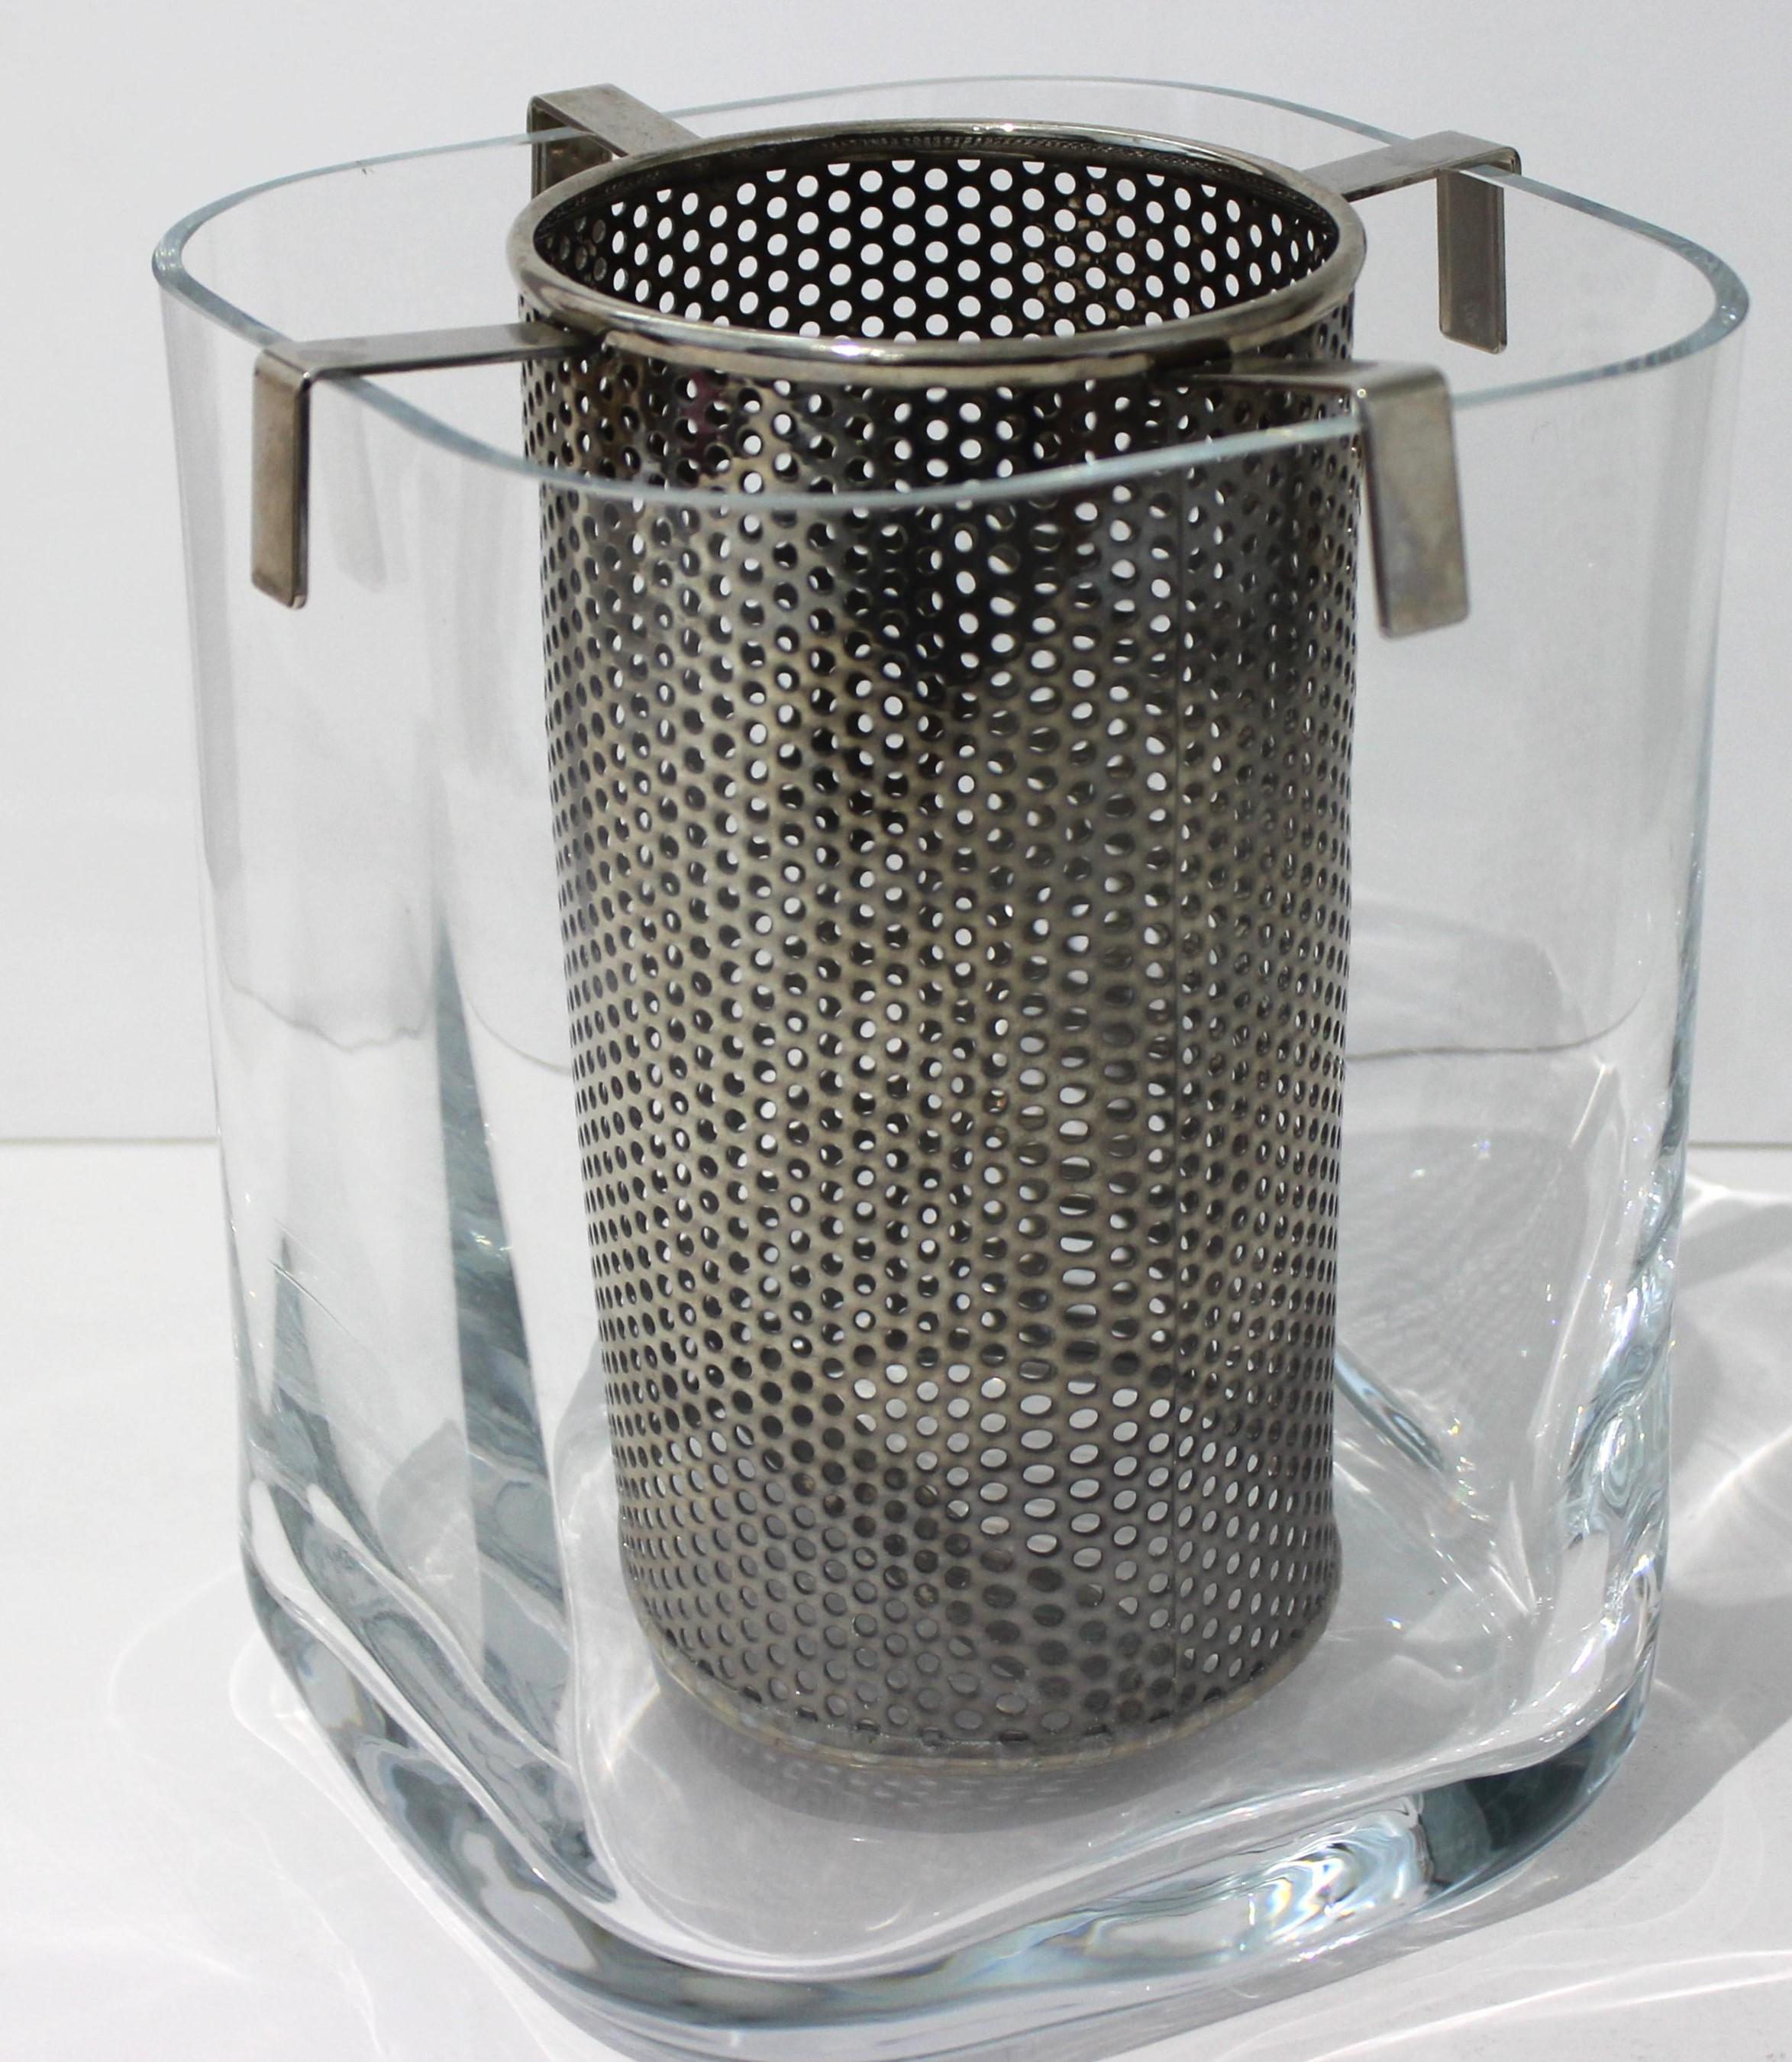 Mid-Century Modern Orrefors wine cooler glass and stainless steel from a Palm Beach estate.